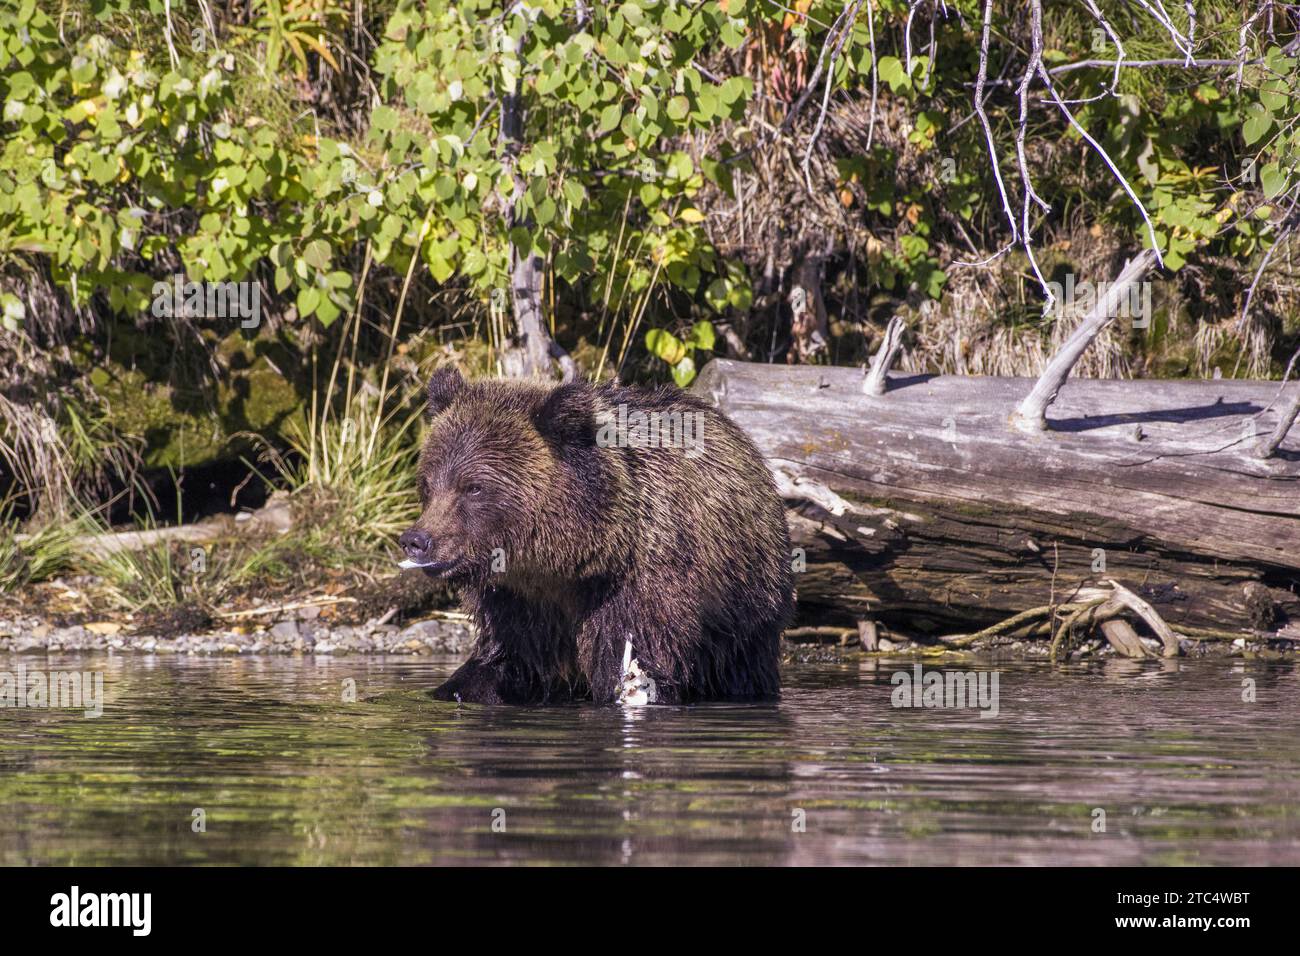 Young grizzly bear snacking on a piece of dead salmon, Chilko River, BC Stock Photo